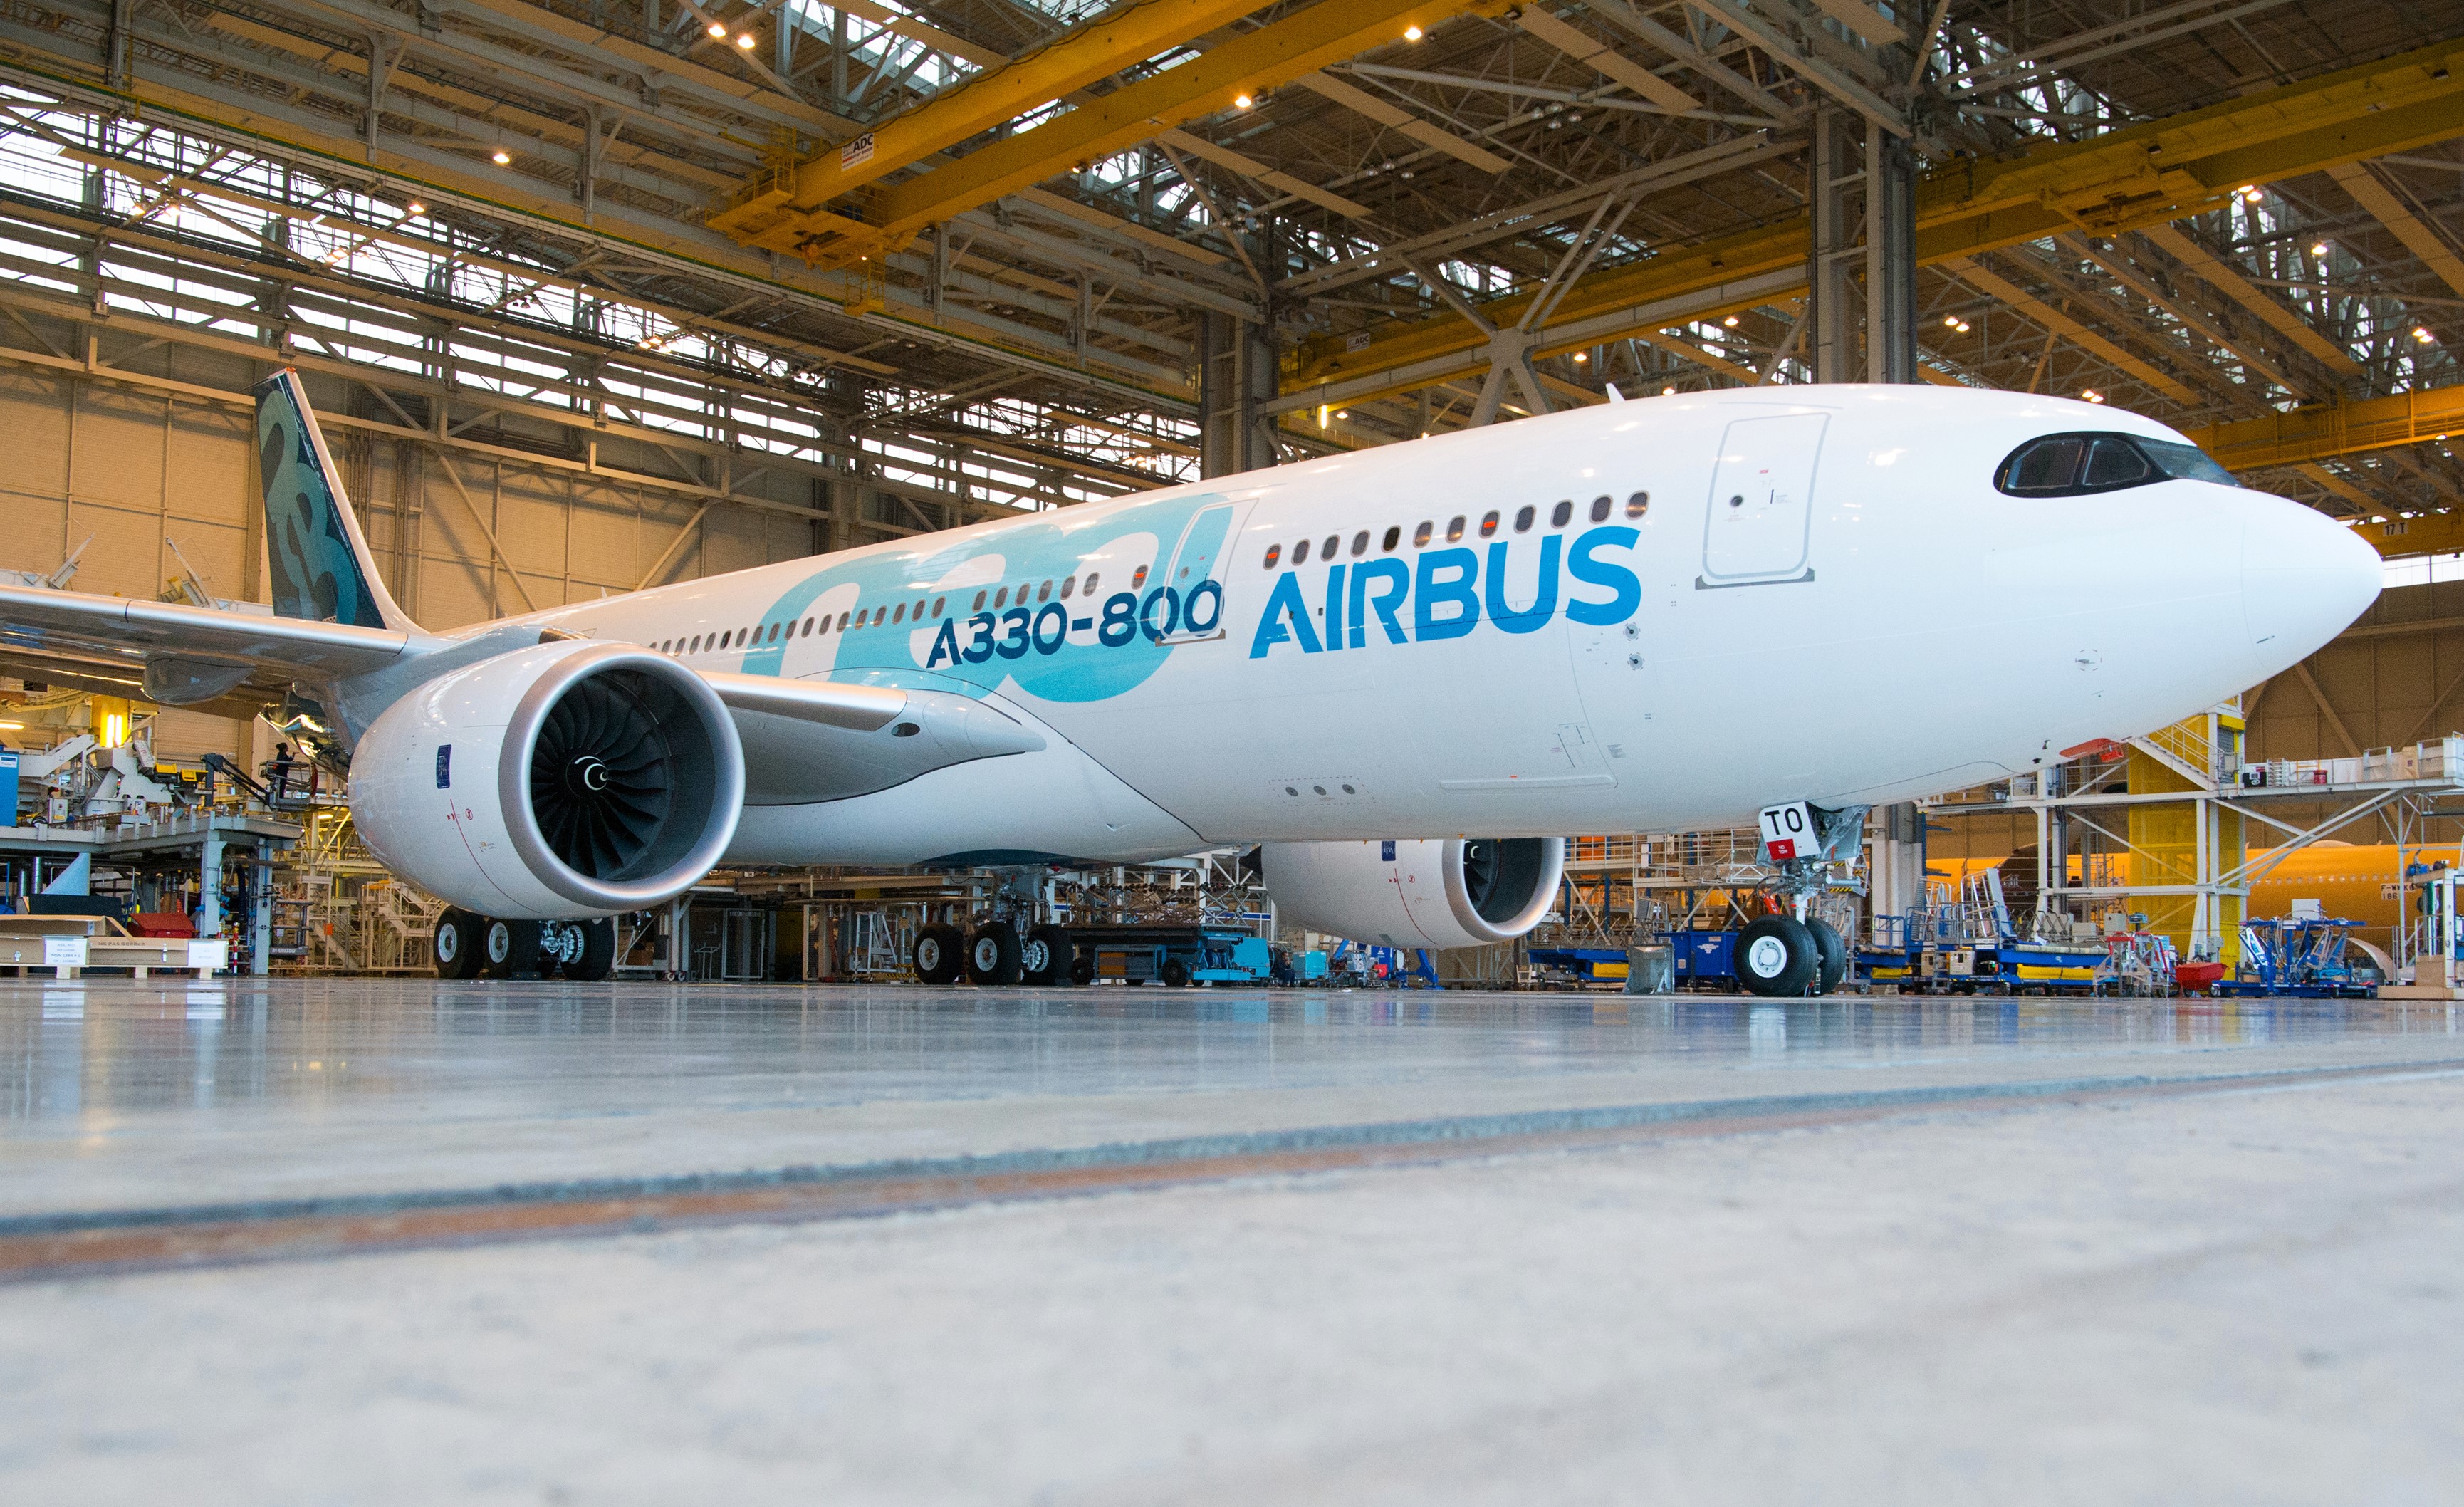 A330-800 roll out